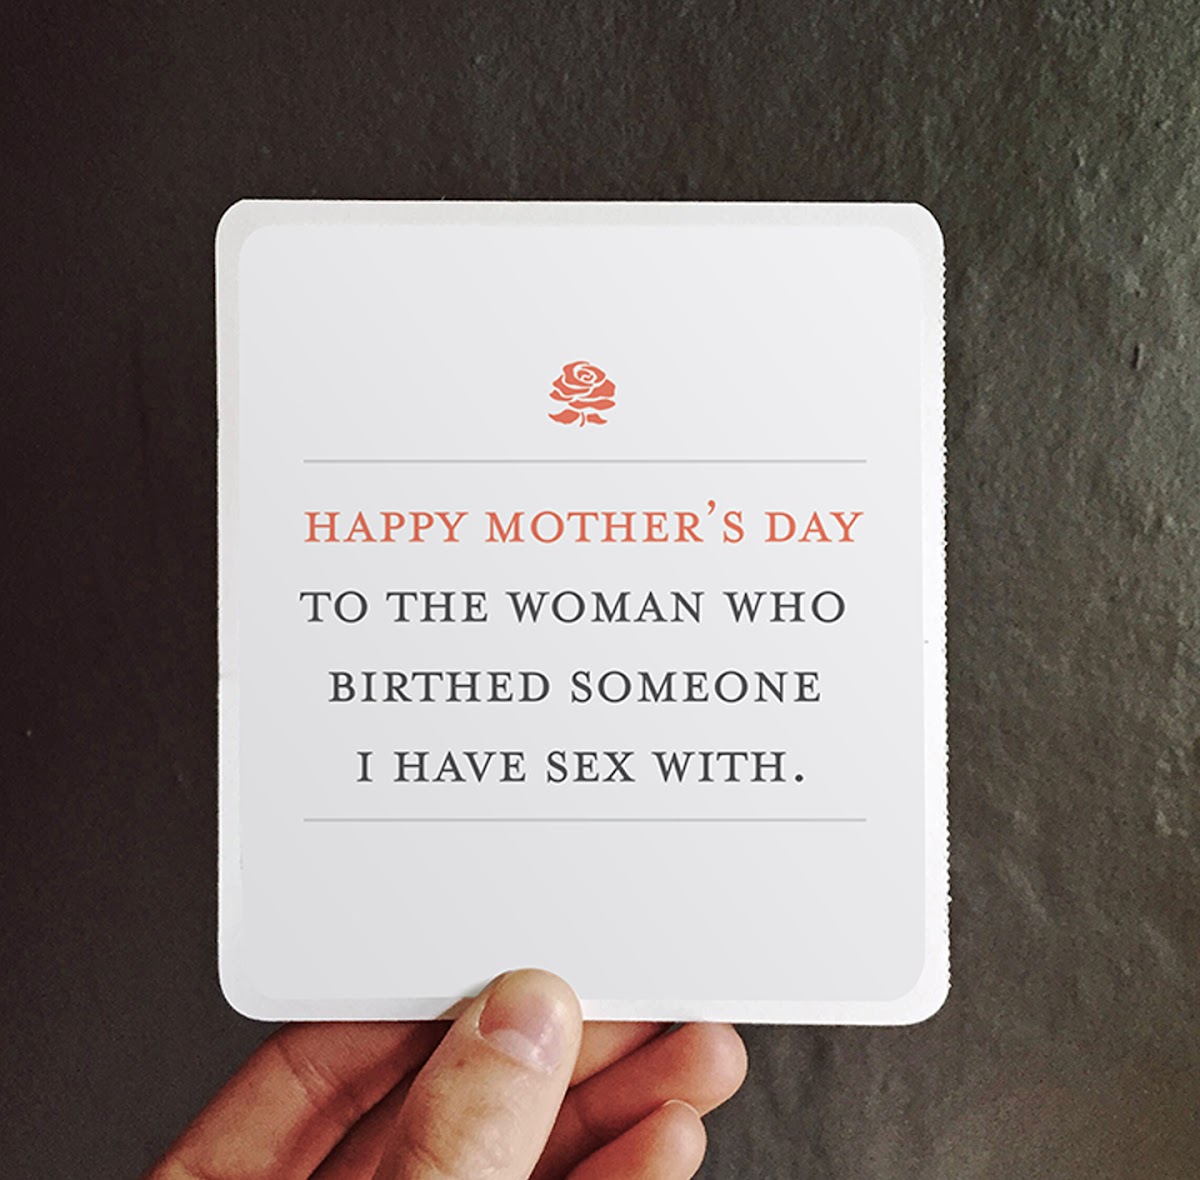 Felt Introduces The Must Have Humourous Mother-in-Law Card Collection for Mother's Day